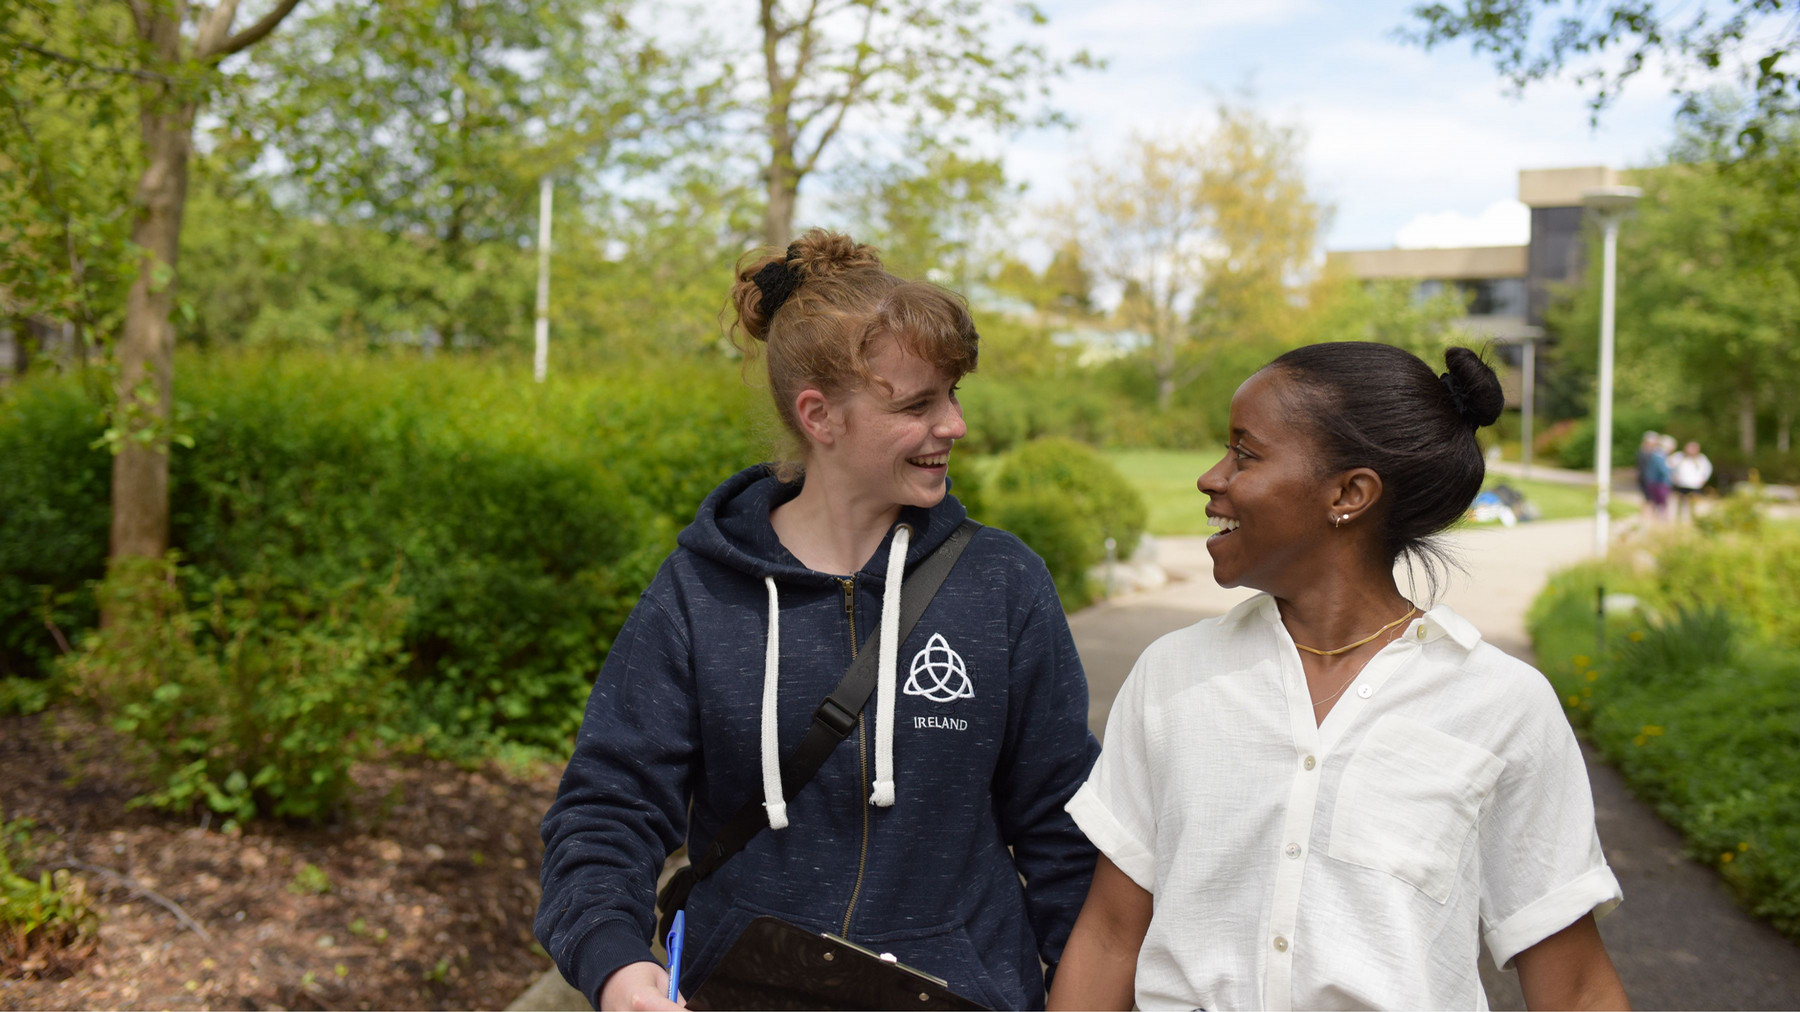 Two students pictured walking together on campus, engaged in conversation.